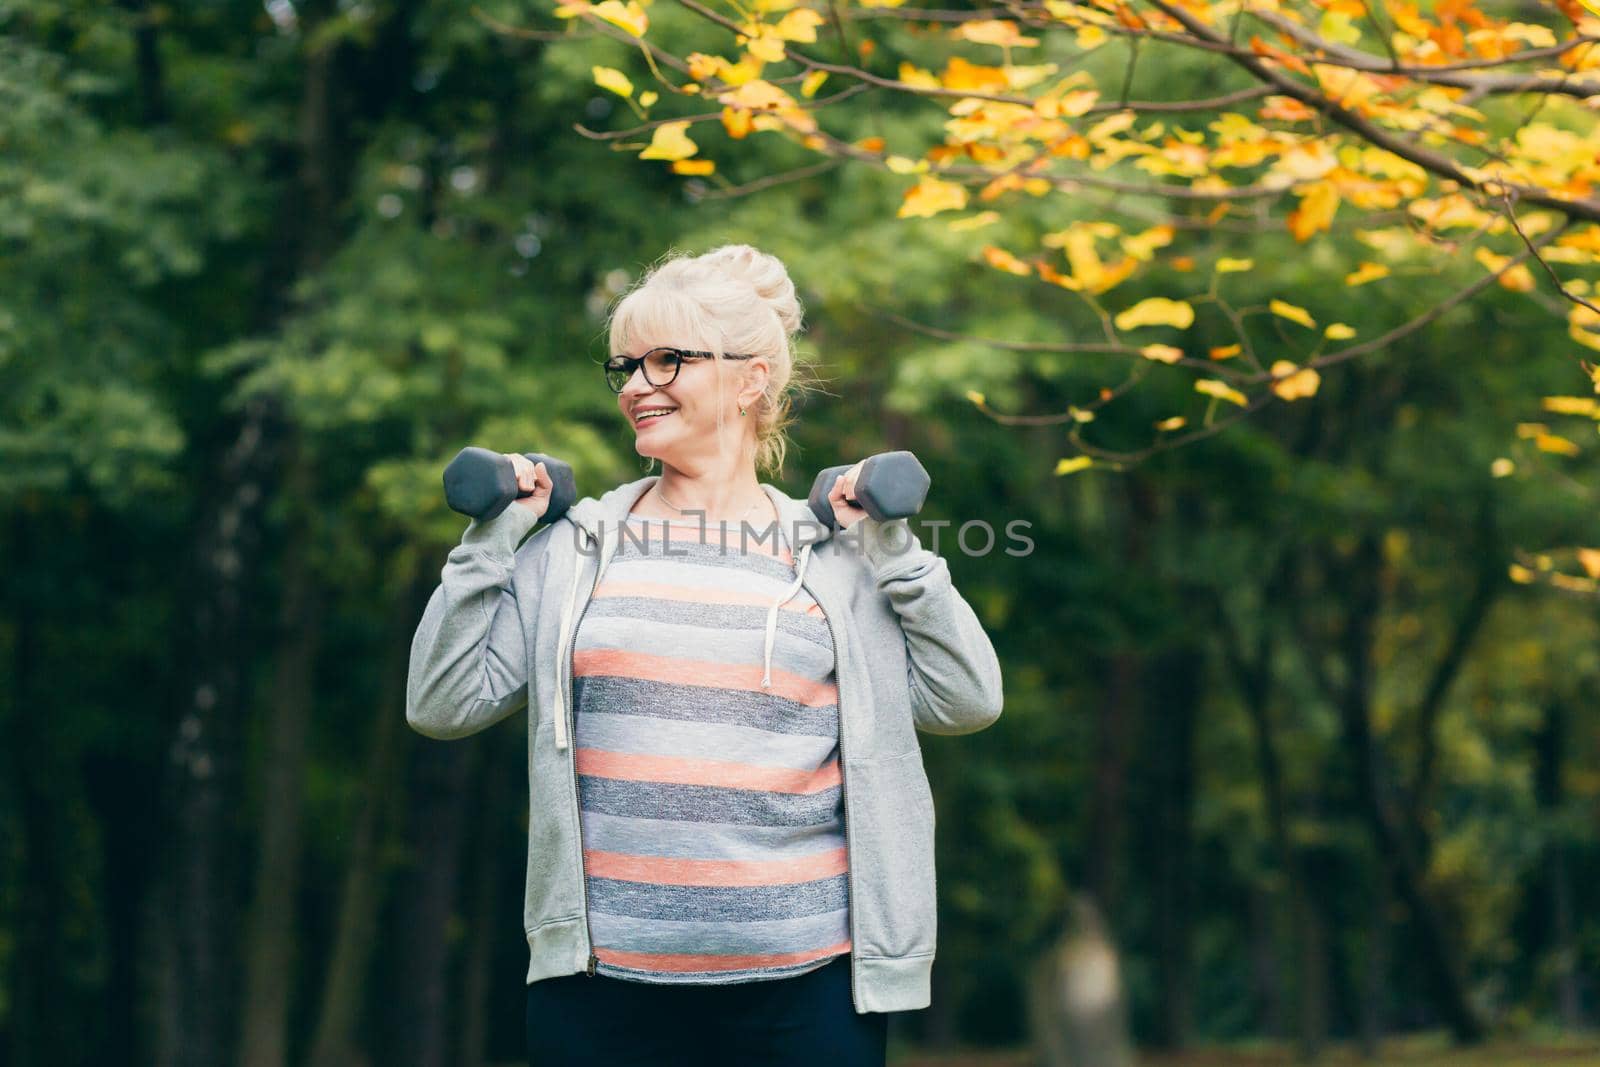 Senior woman standing and doing sports exercises with dumbbells in her hands in the park on the grass, exercising, leading a healthy active lifestyle sitting on the grass